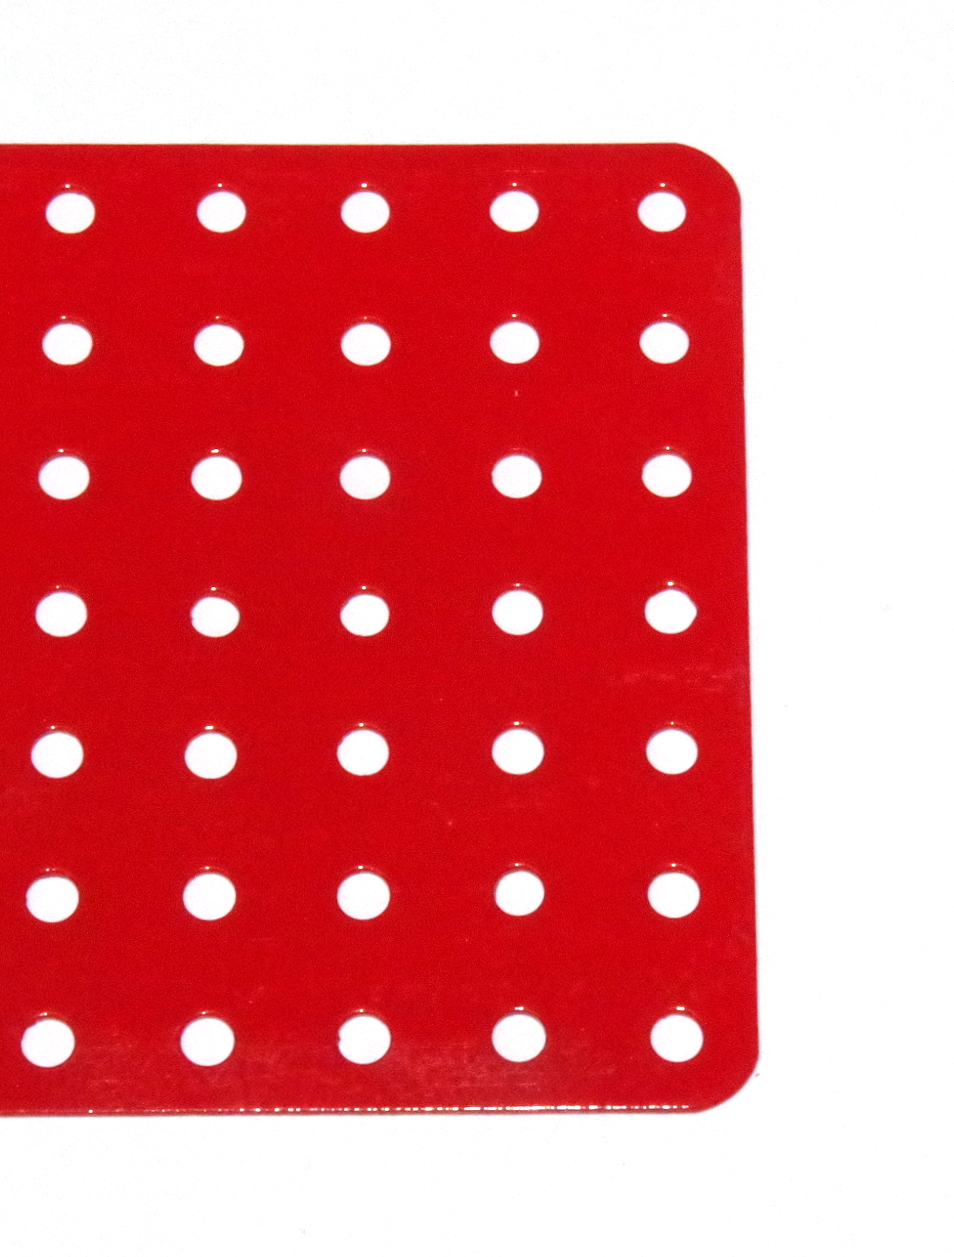 52d Flat Plate 7x25 Hole Red